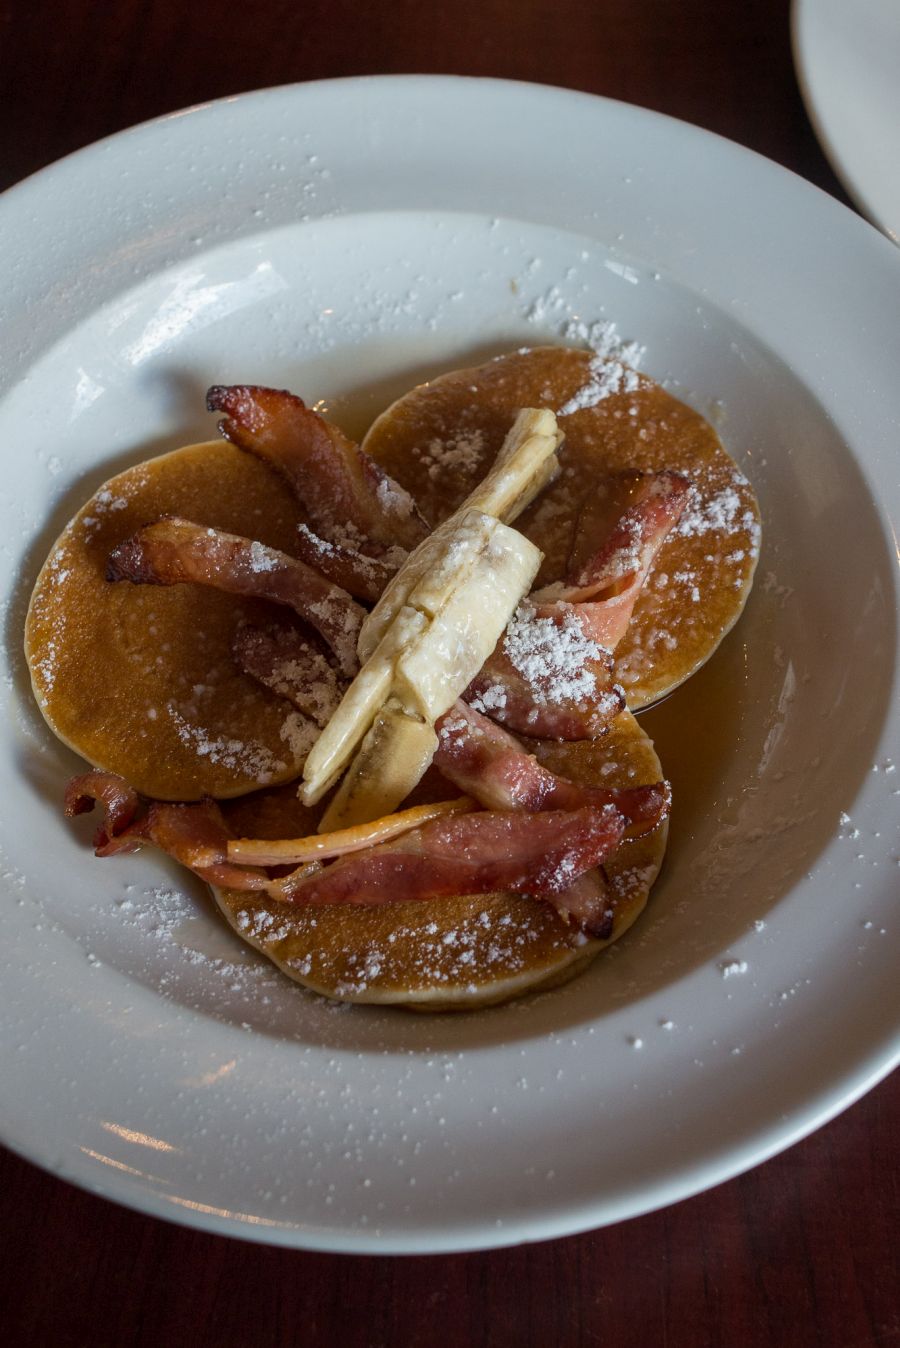 Pancakes with bacon, banana and maple syrup (NZ$15)